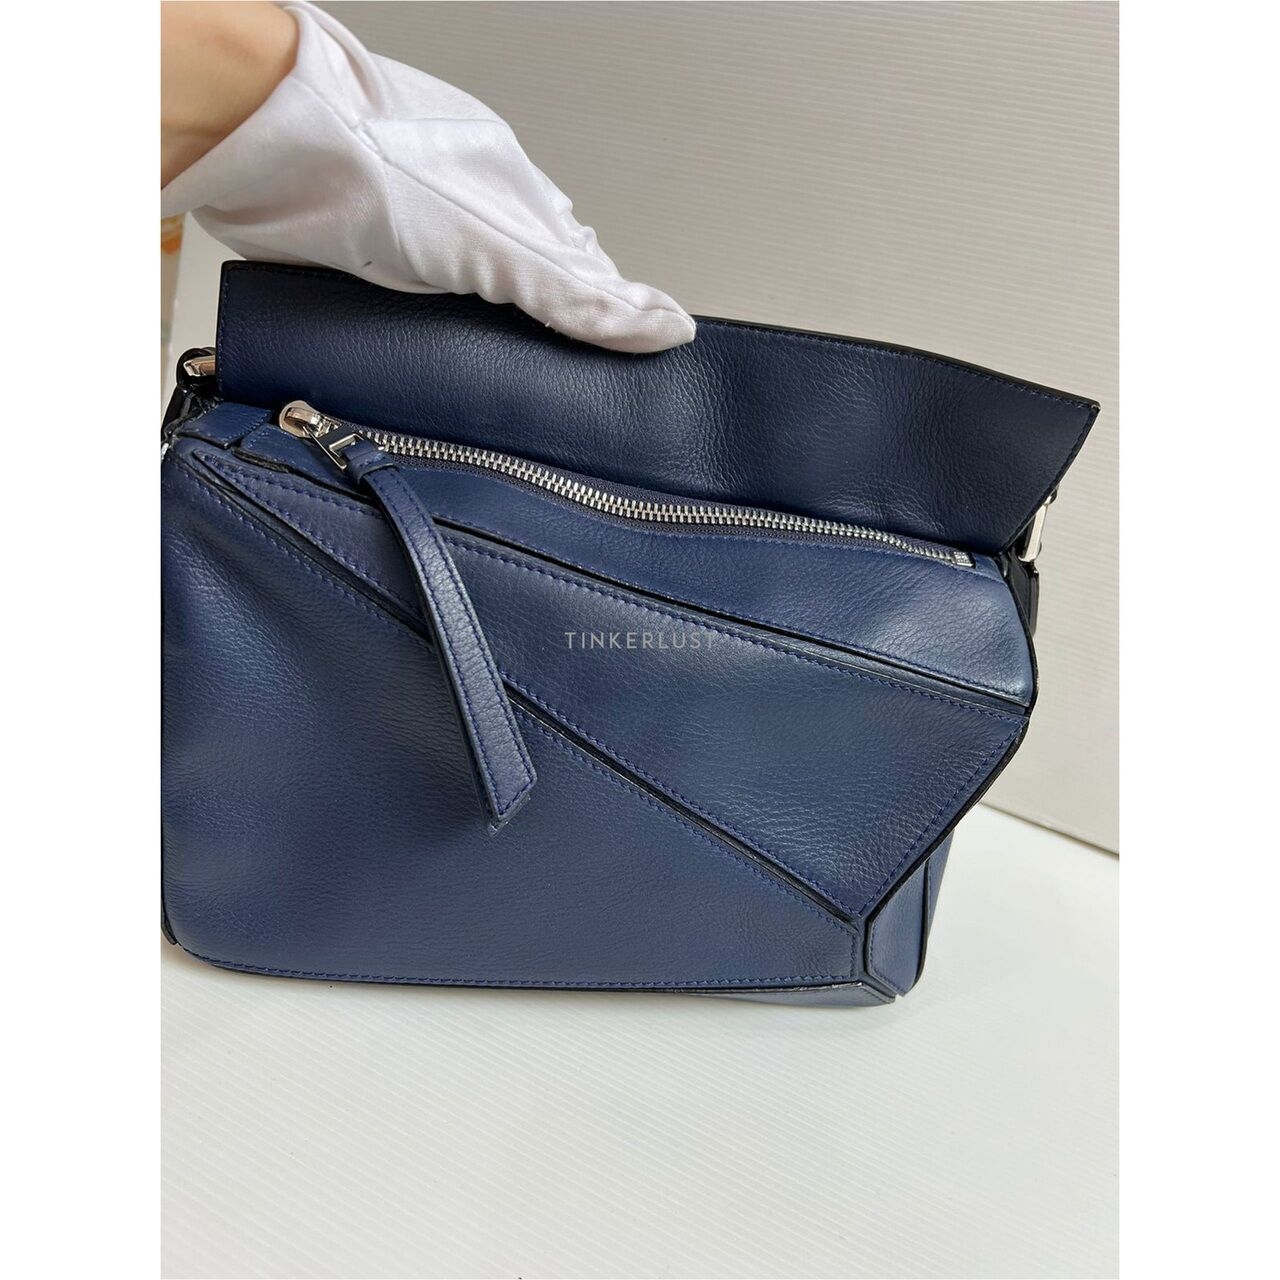 Loewe Puzzle Small Navy Blue SHW Satchel